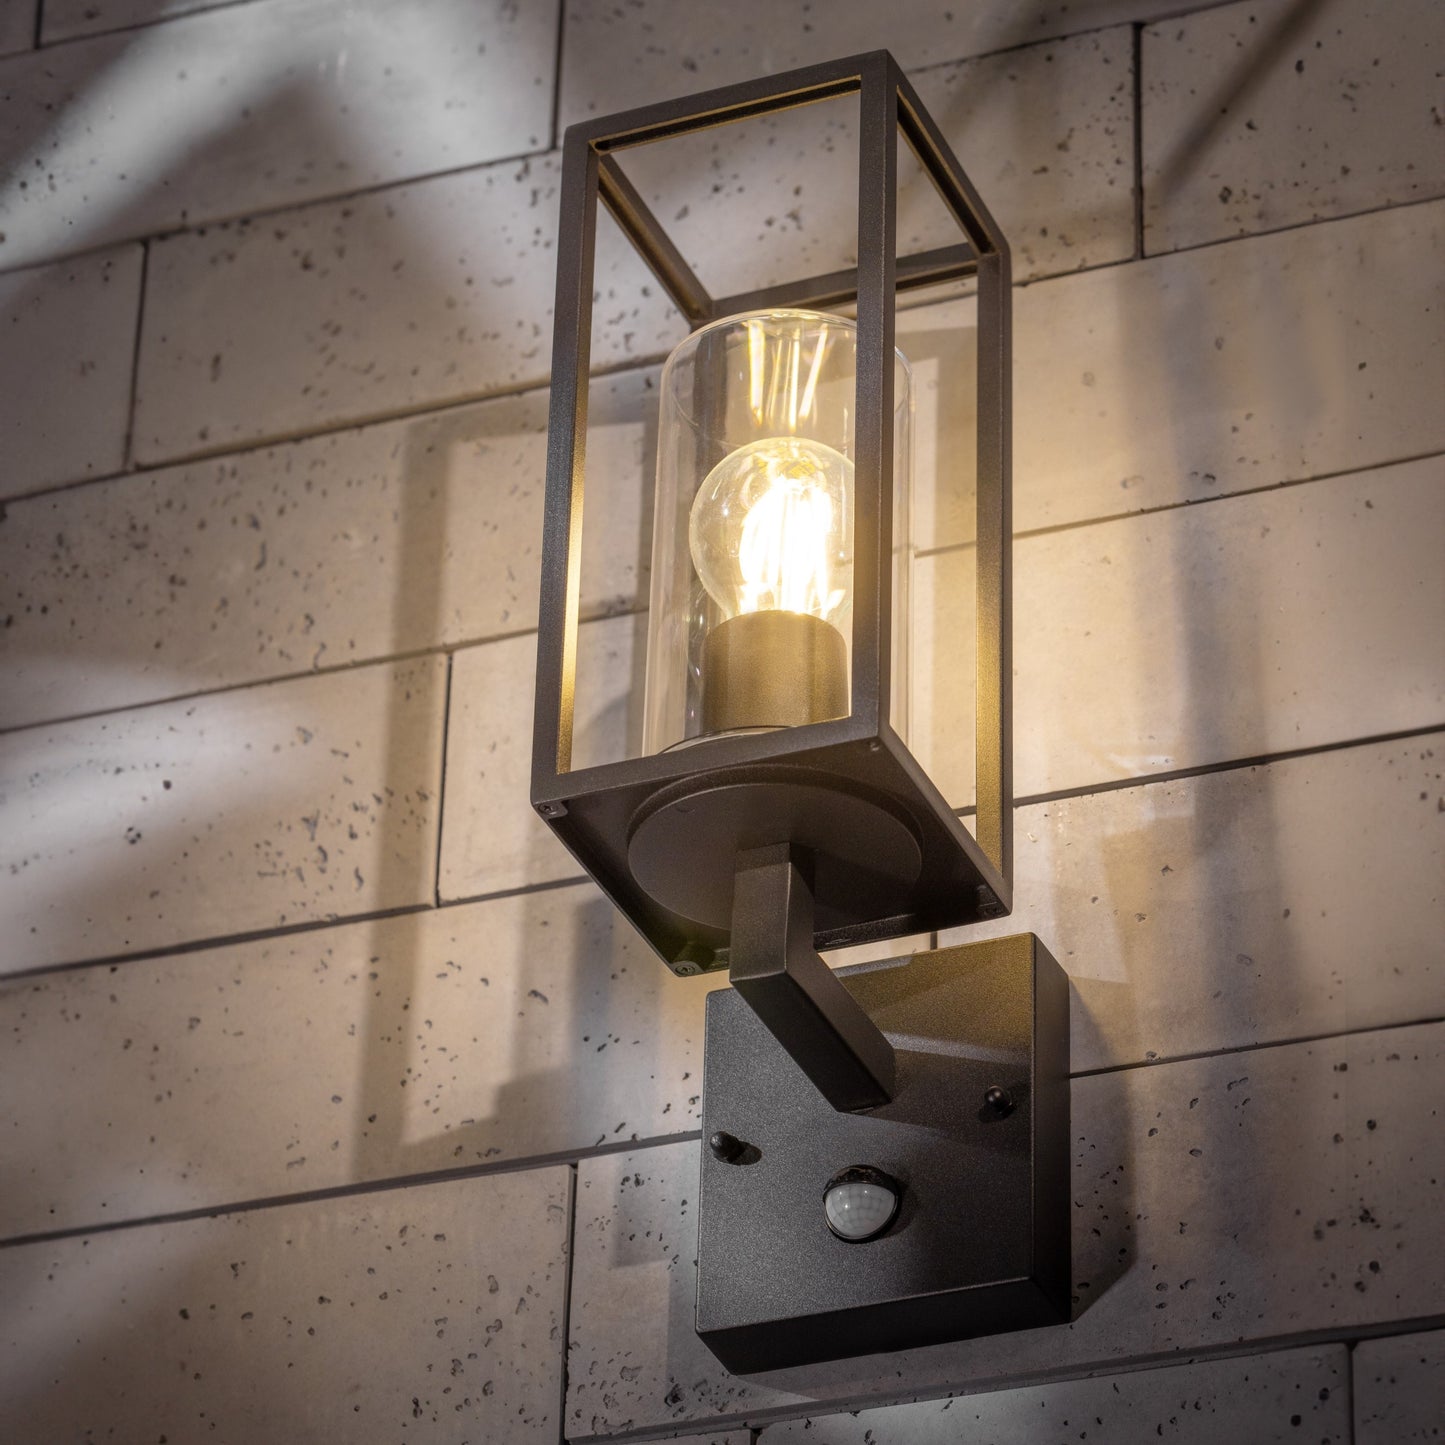 If you’re looking for a modern take on a traditional outdoor wall light, this black lantern wall light with clear diffuser is perfect for adding style and protection for your home. This classic design with a contemporary twist, styled with a metal lantern shape and fitted with a cylinder diffuser that allows the light to shine effectively